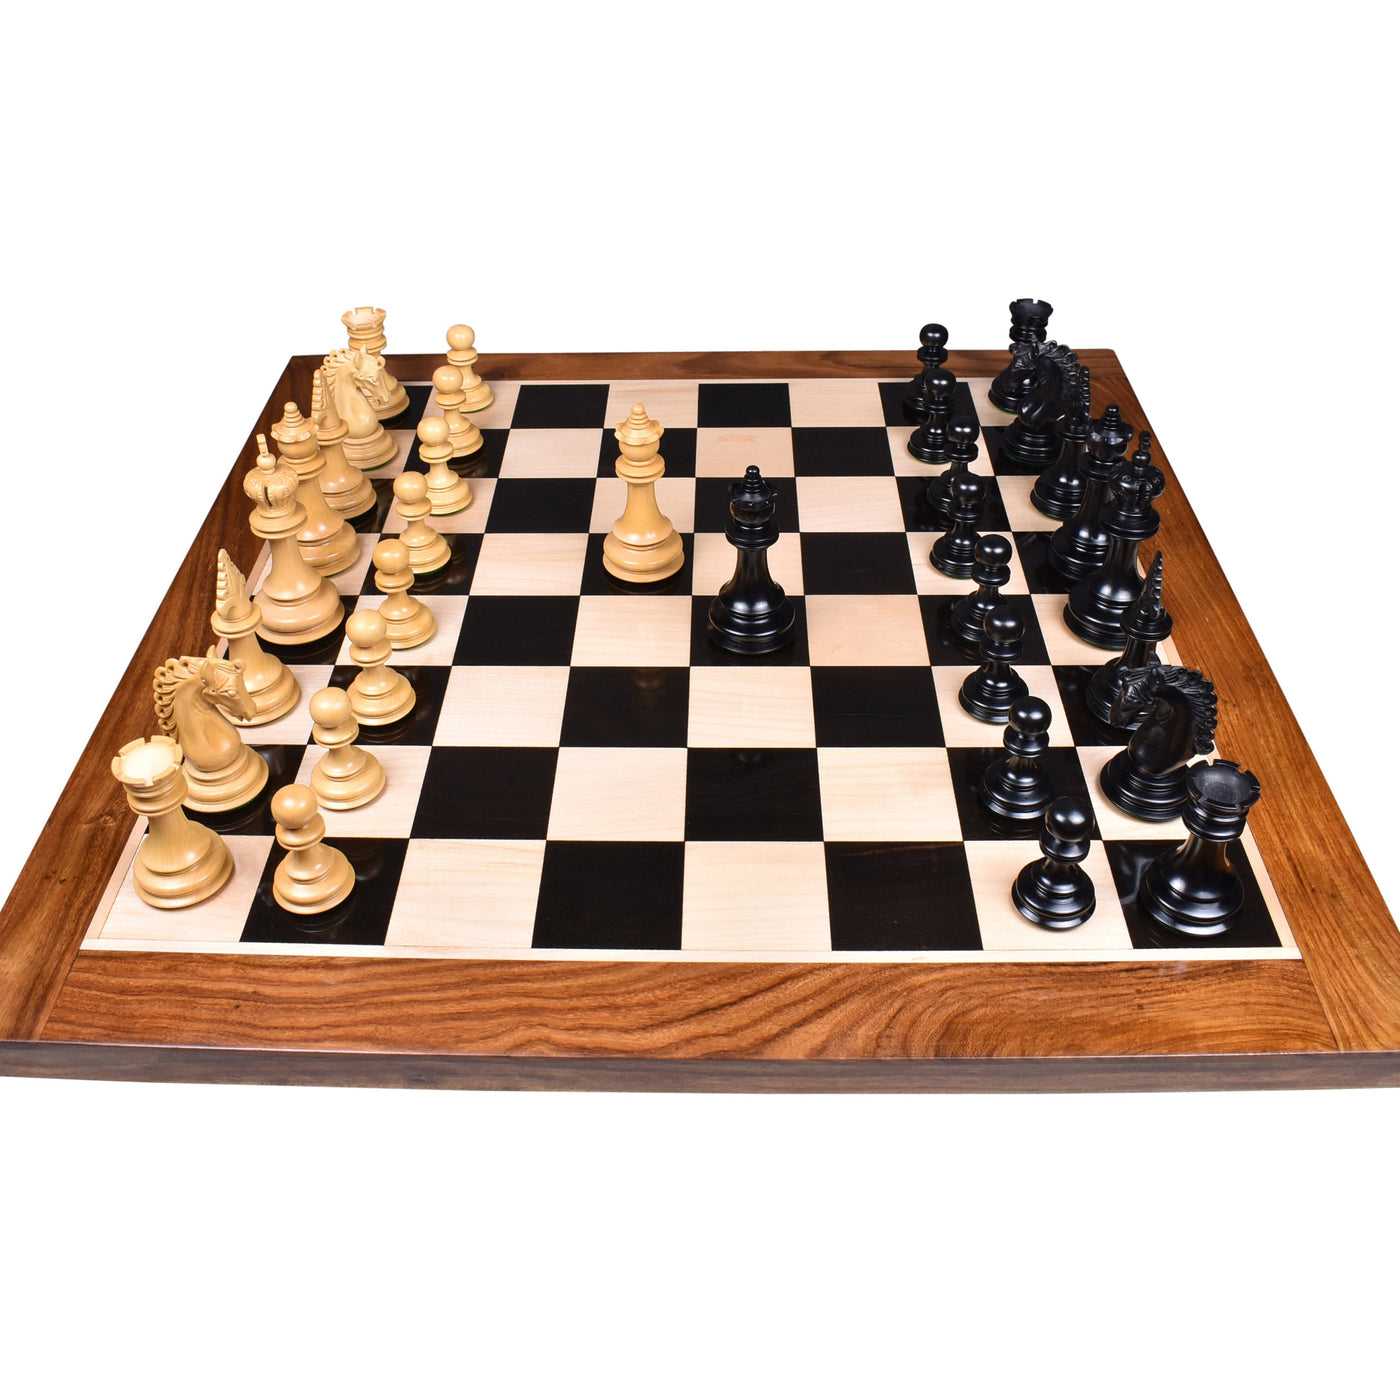 Slightly Imperfect 4.5" Carvers' Art Luxury Chess Pieces Only Set